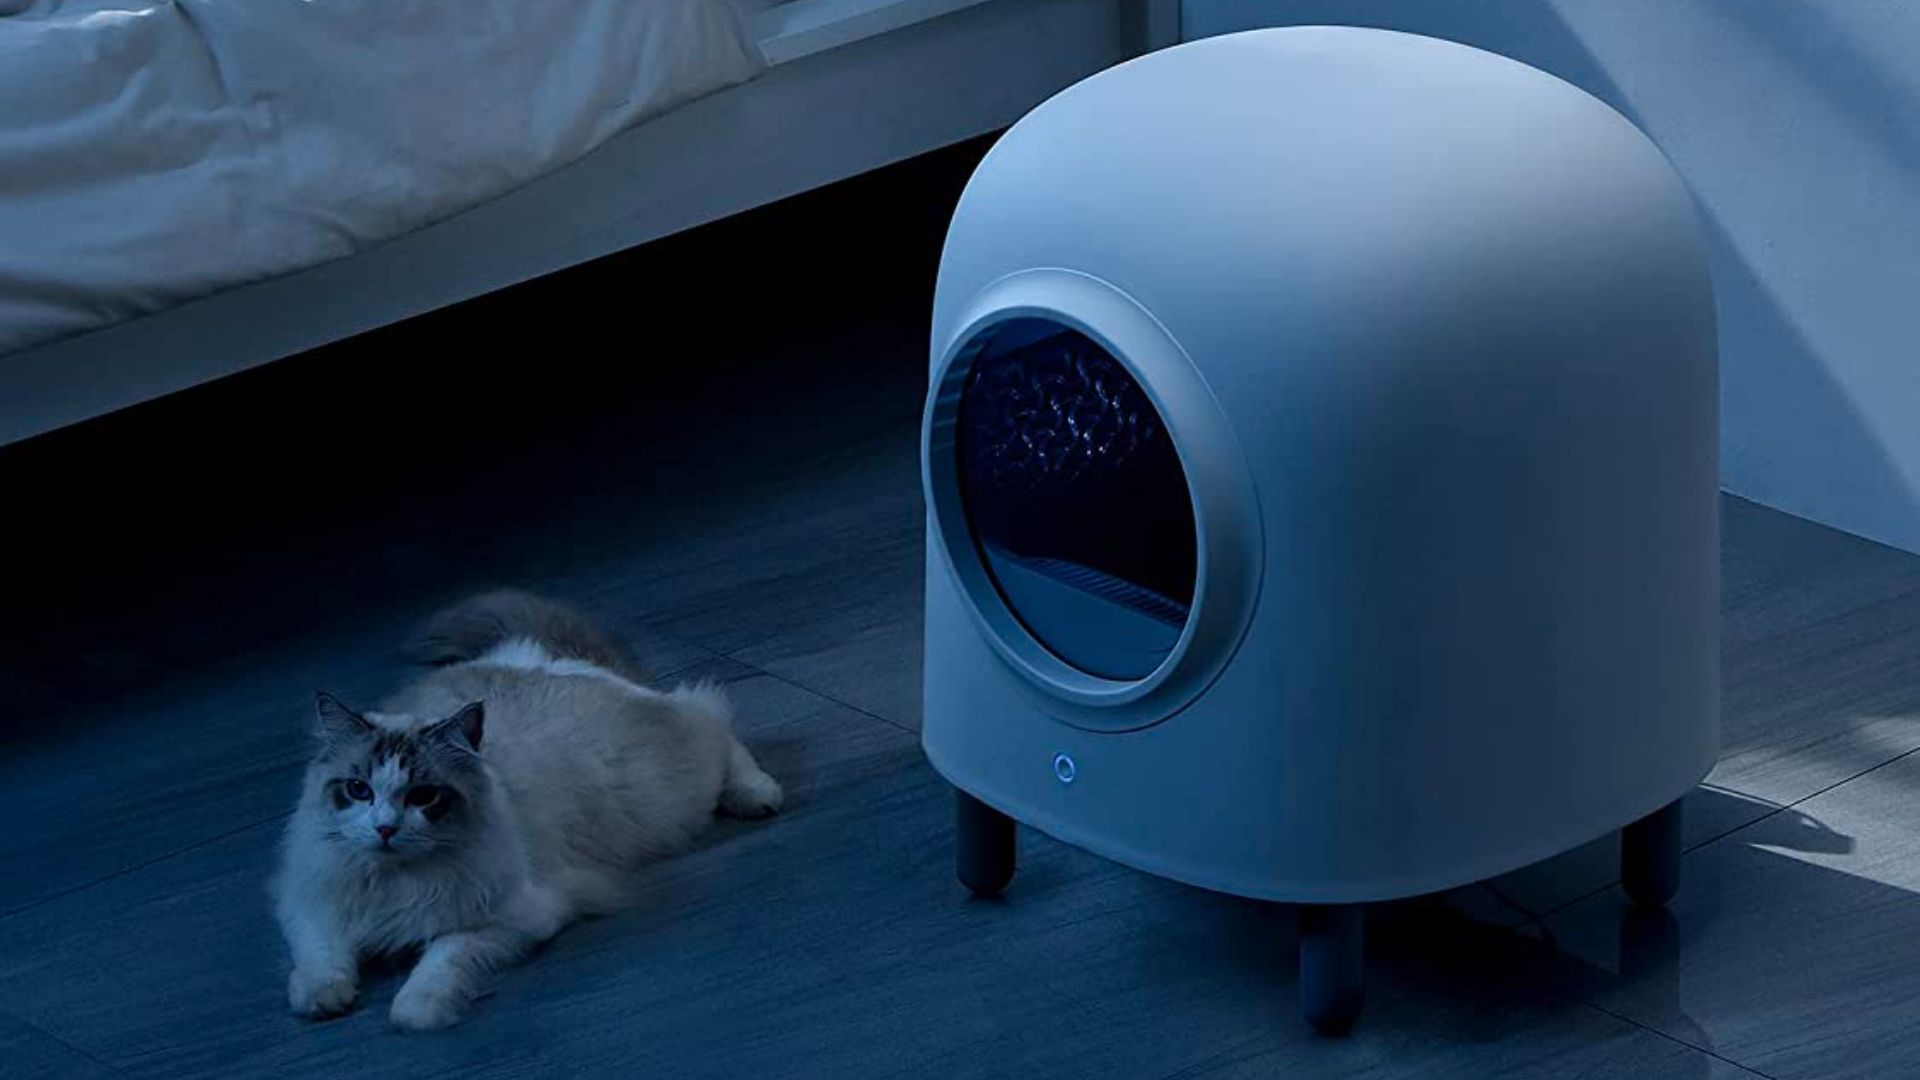 Self cleaning litter box by Petree